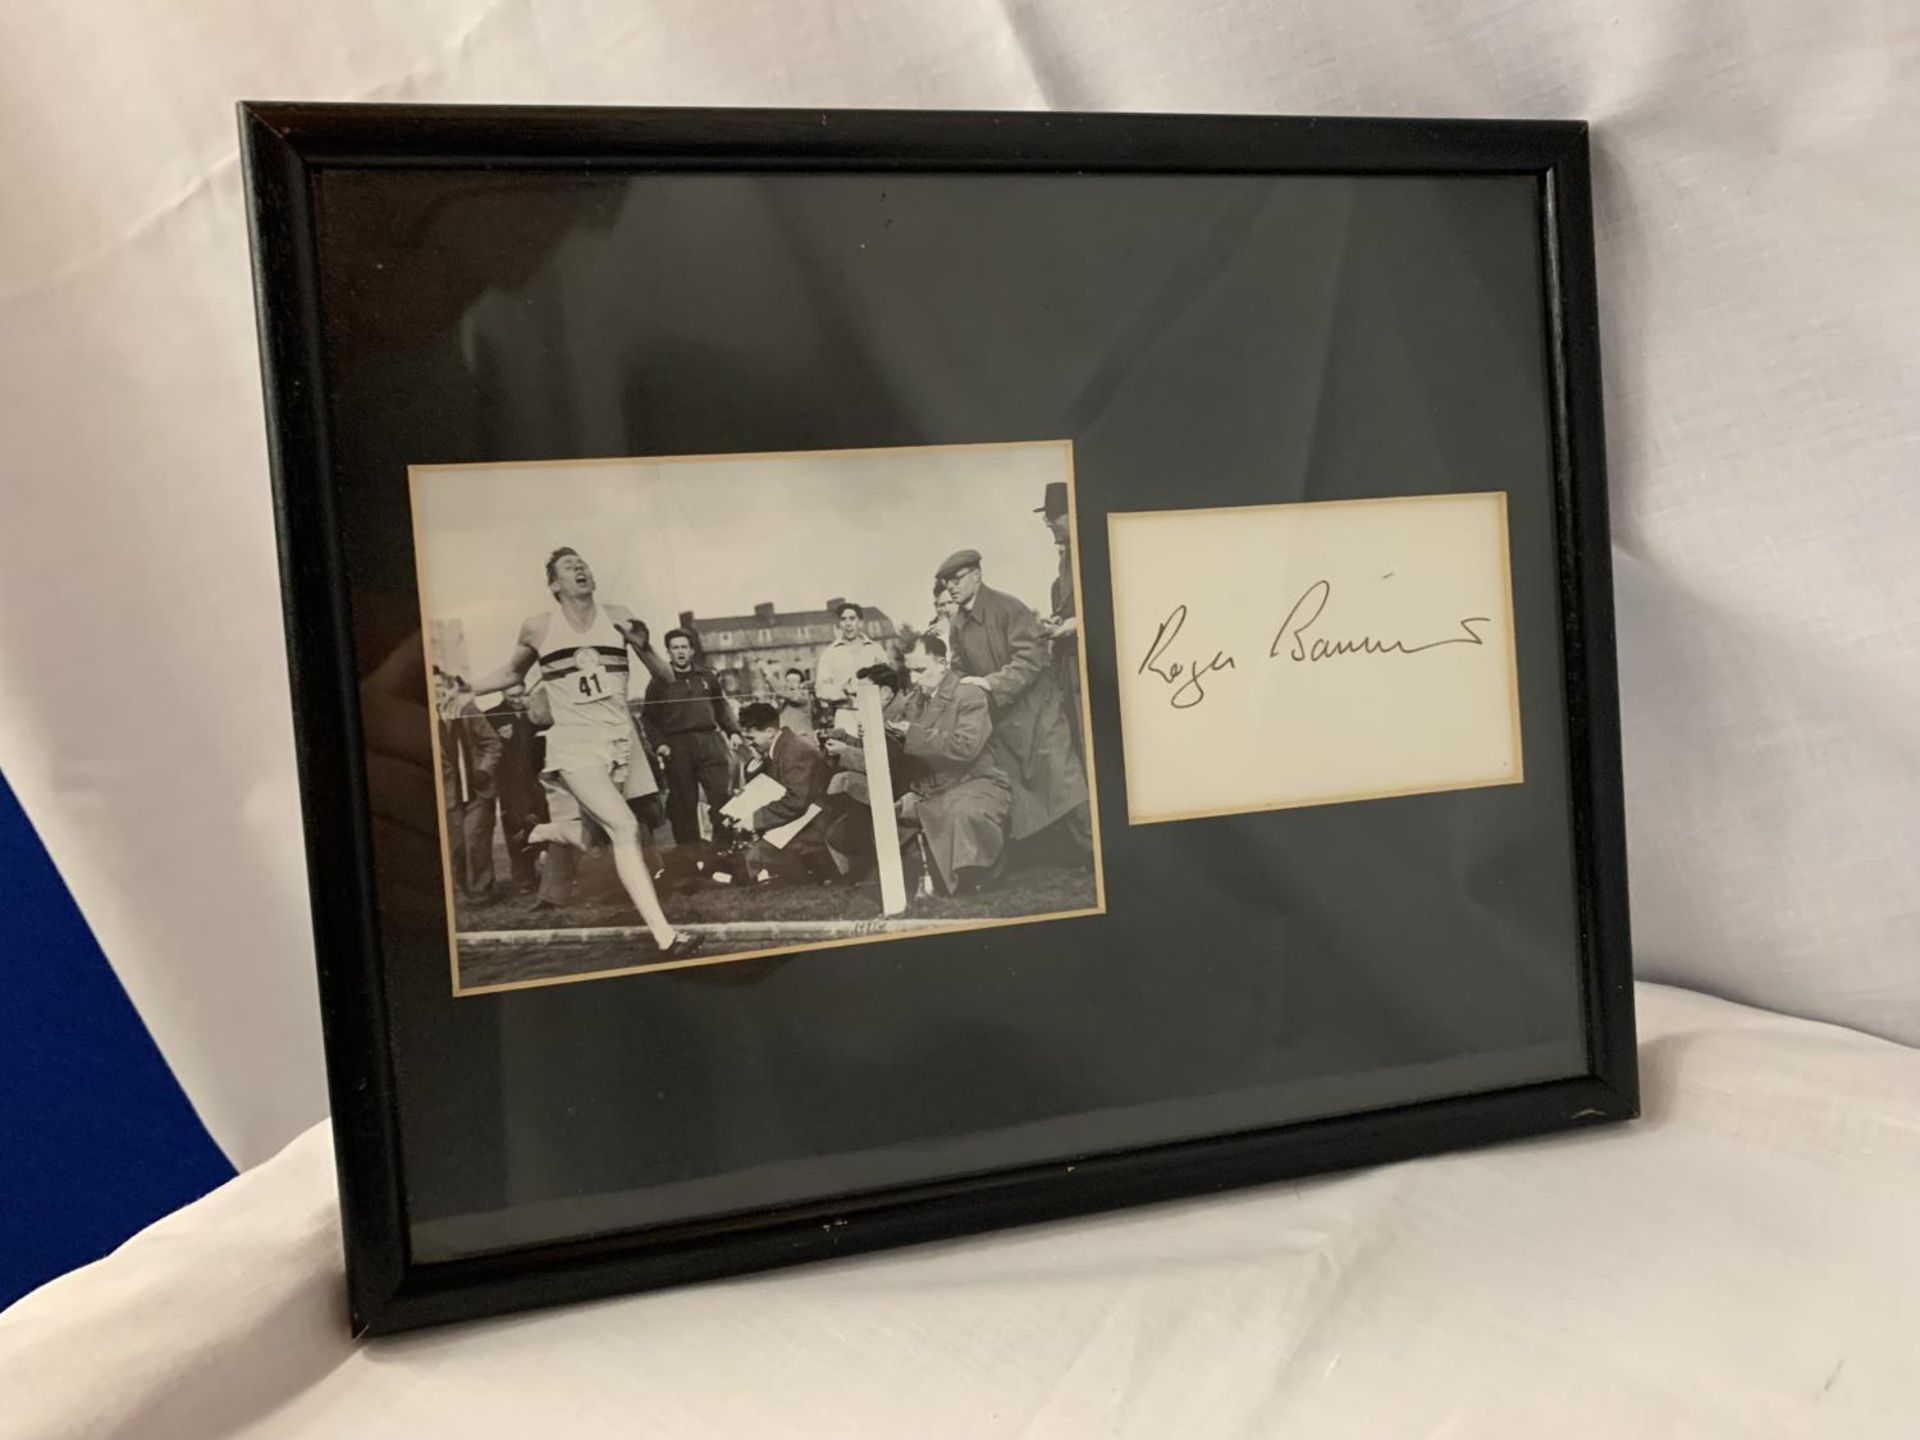 A FRAMED AND SIGNED PHOTOGRAPH OF ROGER BANNISTER